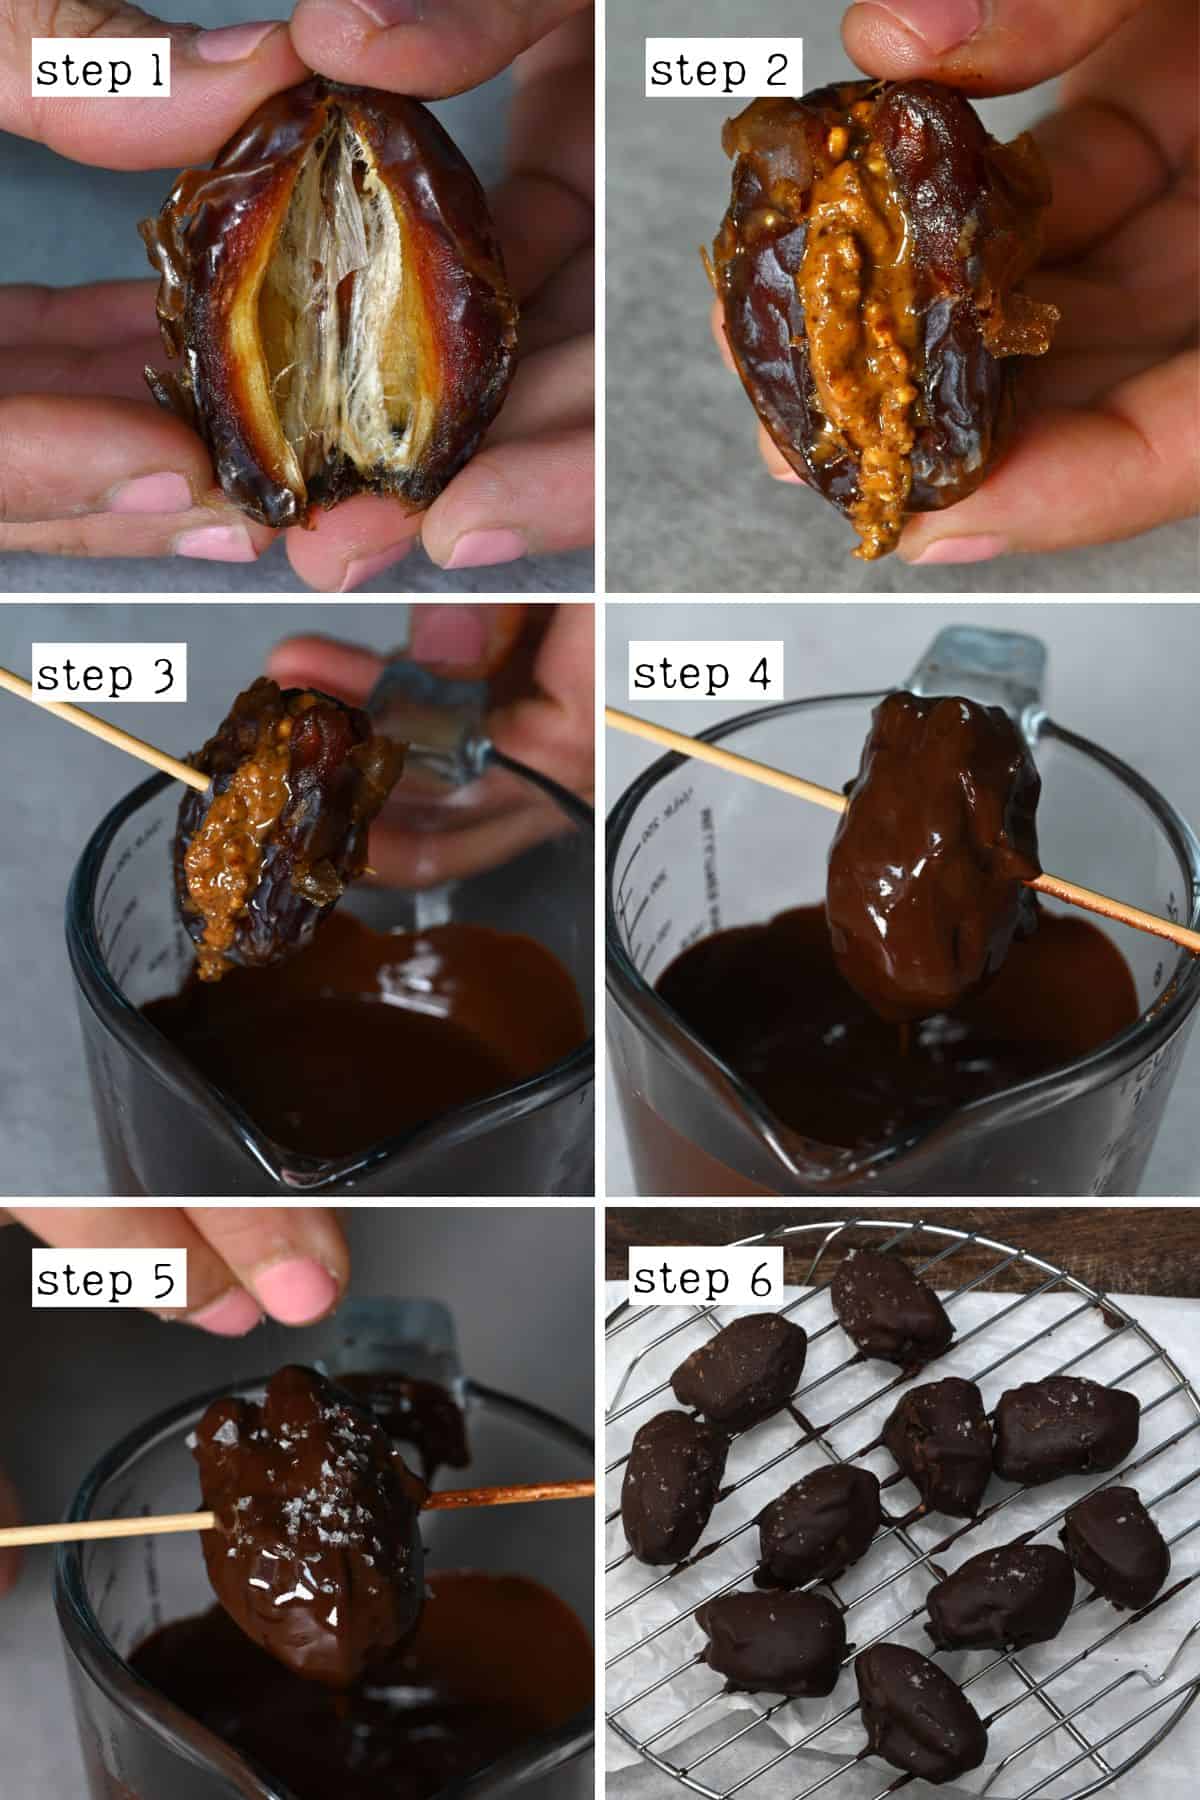 Steps for covering dates with melted chocolate